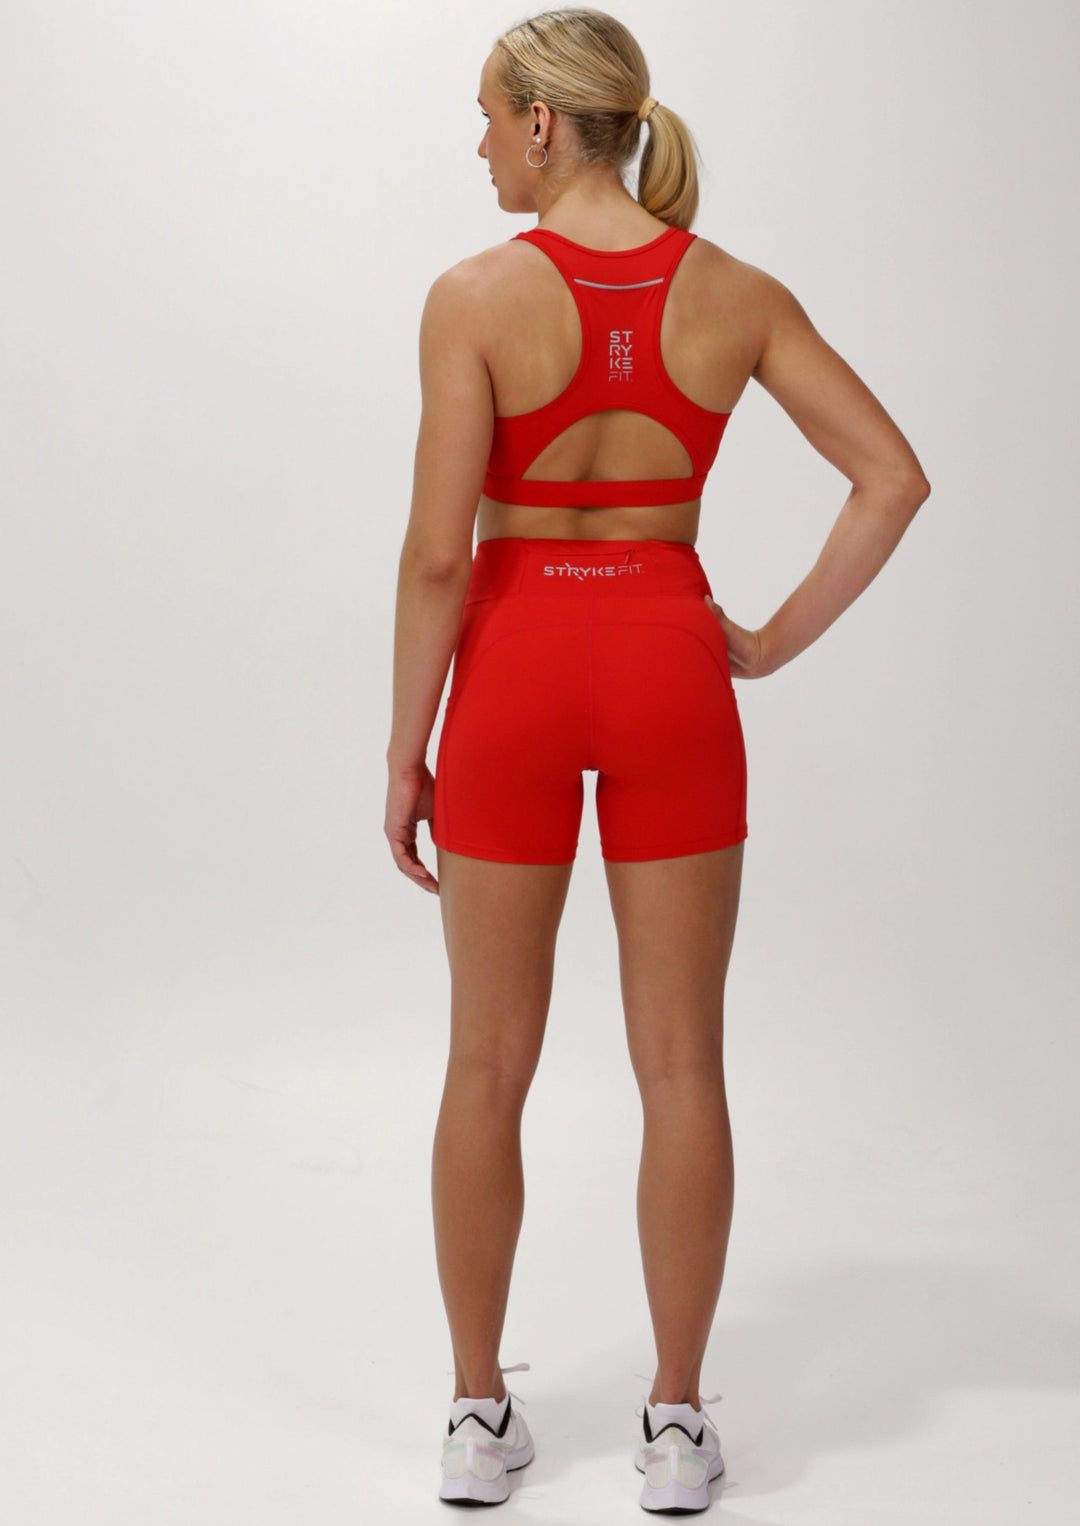 The STRYKE CROP TOP is designed with a back phone pocket enabling you to store your phone effortlessly while wearing, allowing you to listen to music, podcasts, or even just having your phone with you for personal security. The racerback straps follow the curve of your shoulder blades to allow your arms to move freely while offering maximum support. Best running crop top.